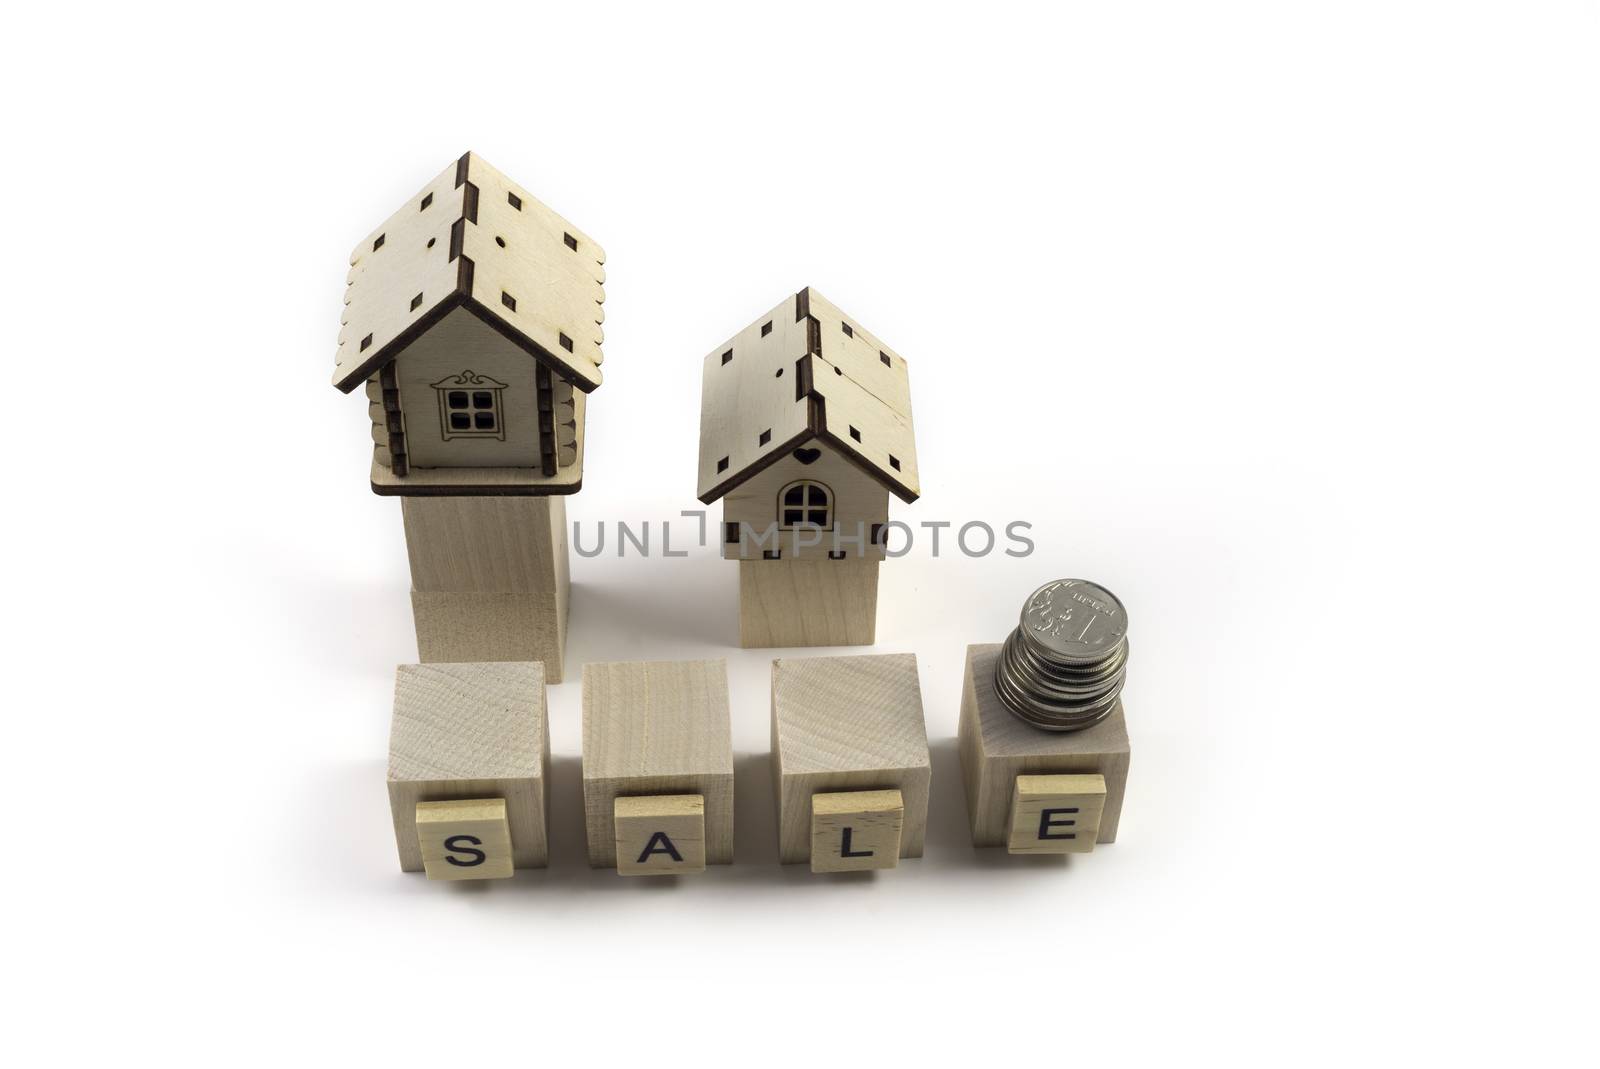 .Real Estate Sale Small Toy Wooden Houses and Sale Lettering by galinasharapova